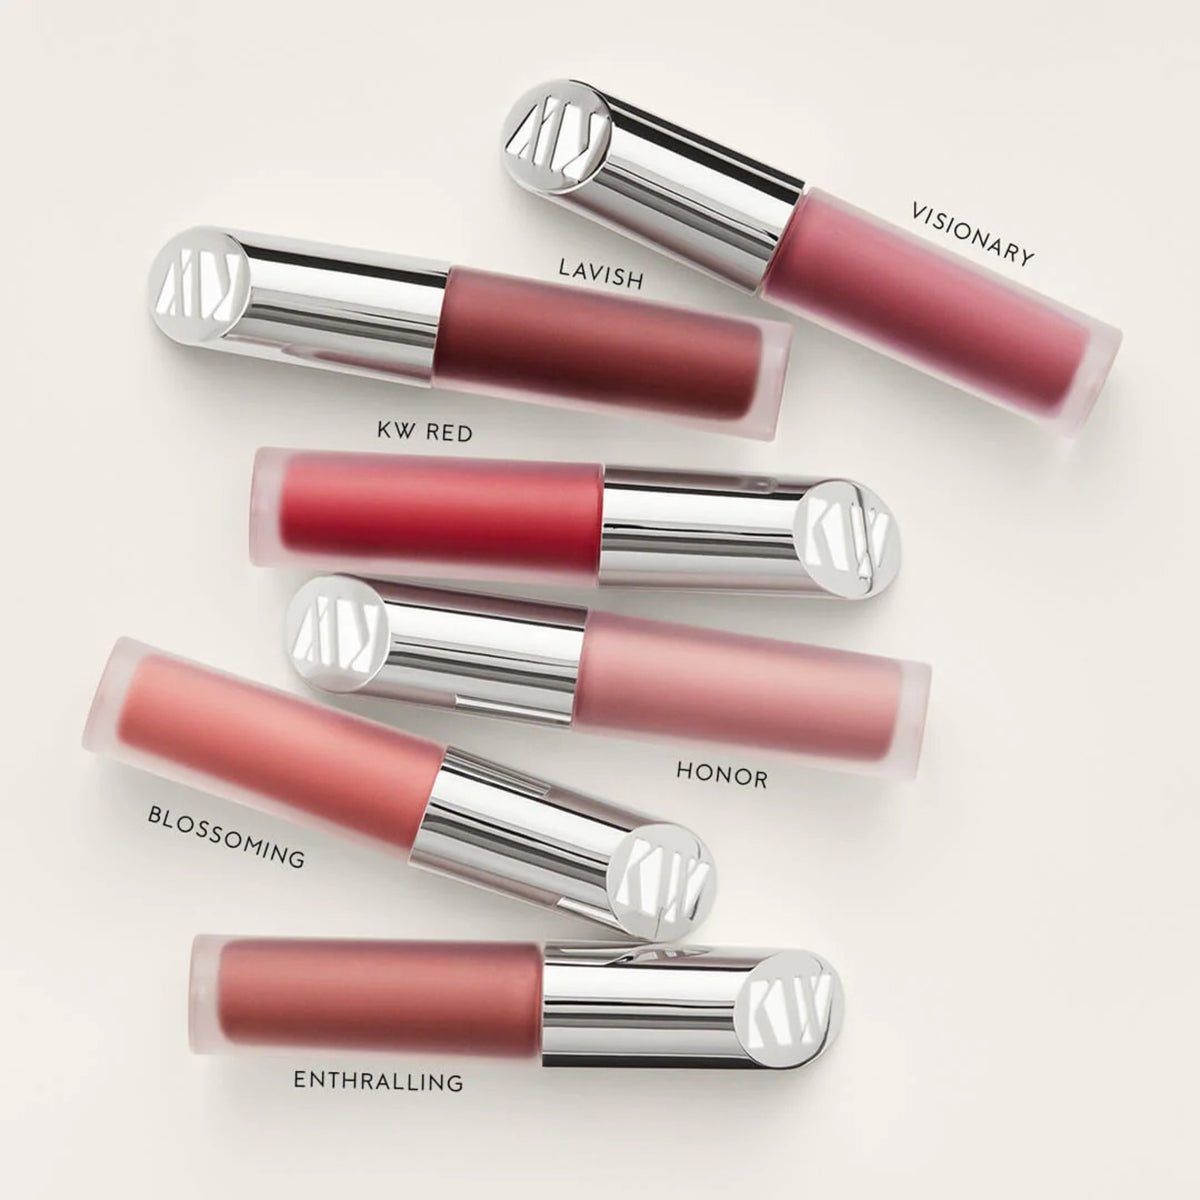 Kjaer Weis Matte, Naturally Liquid Lipstick . This product is in the color nude